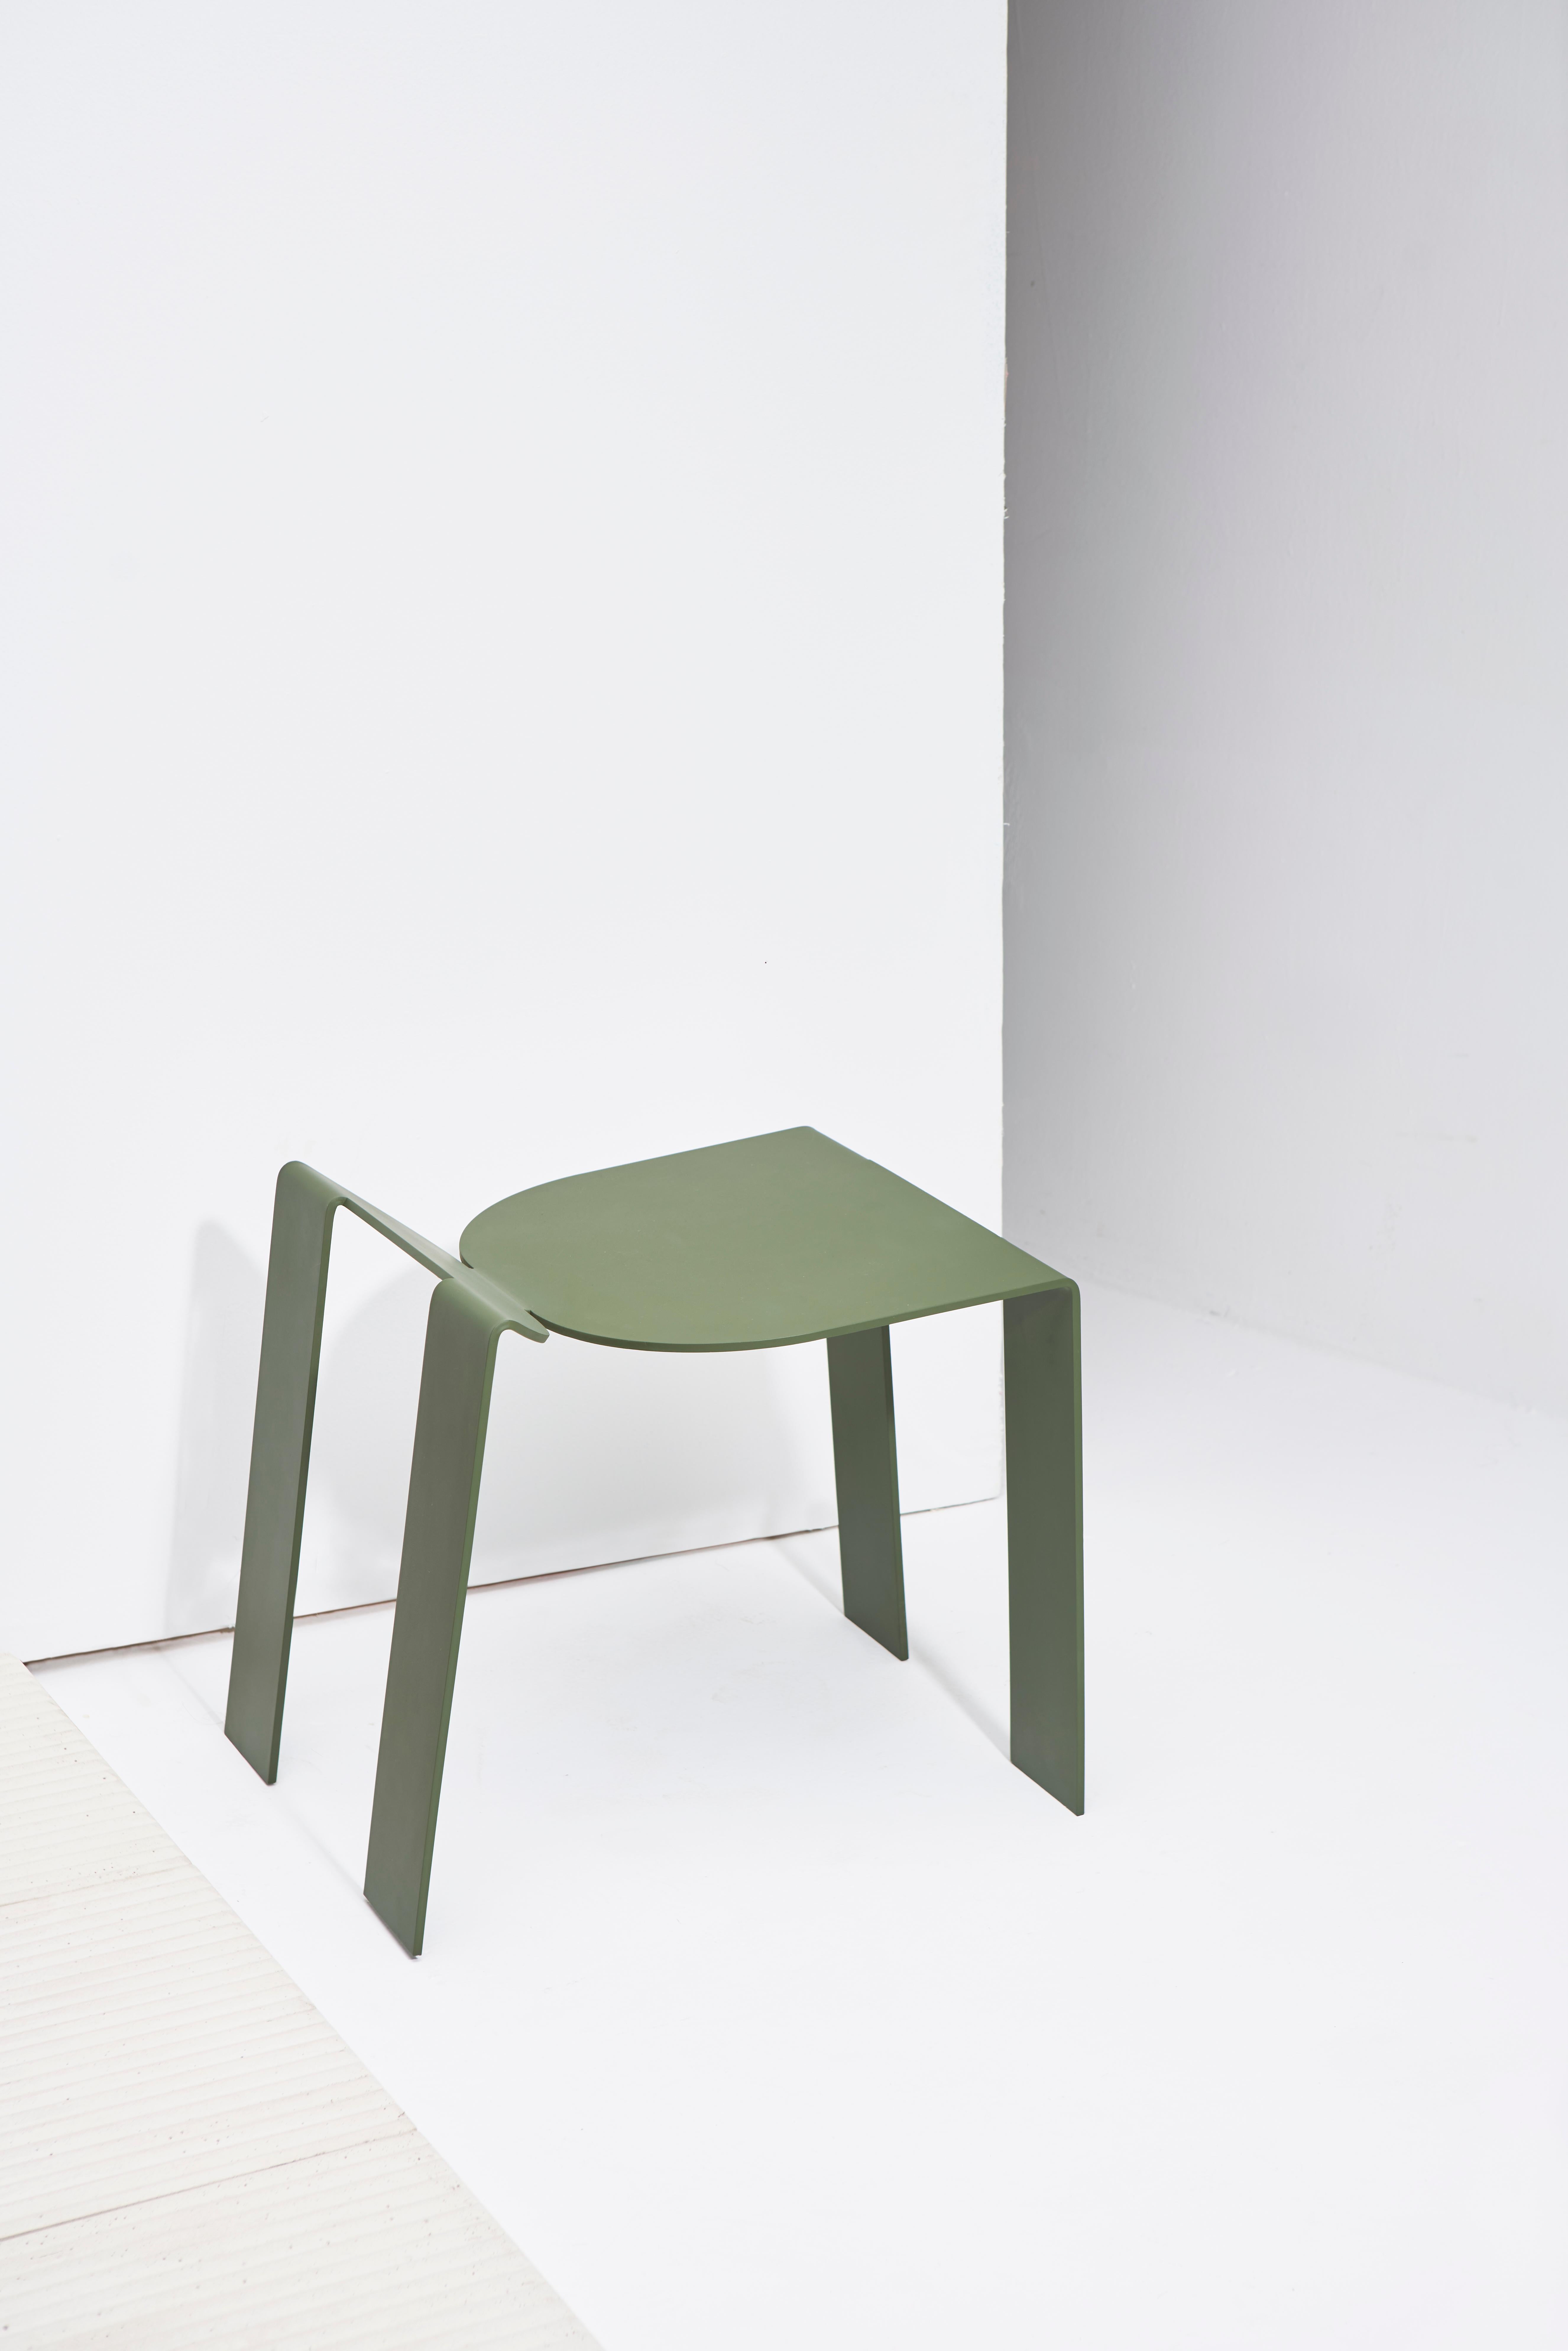 Painted Tropos Collection, Brazilian Contemporary Stool in Steel For Sale